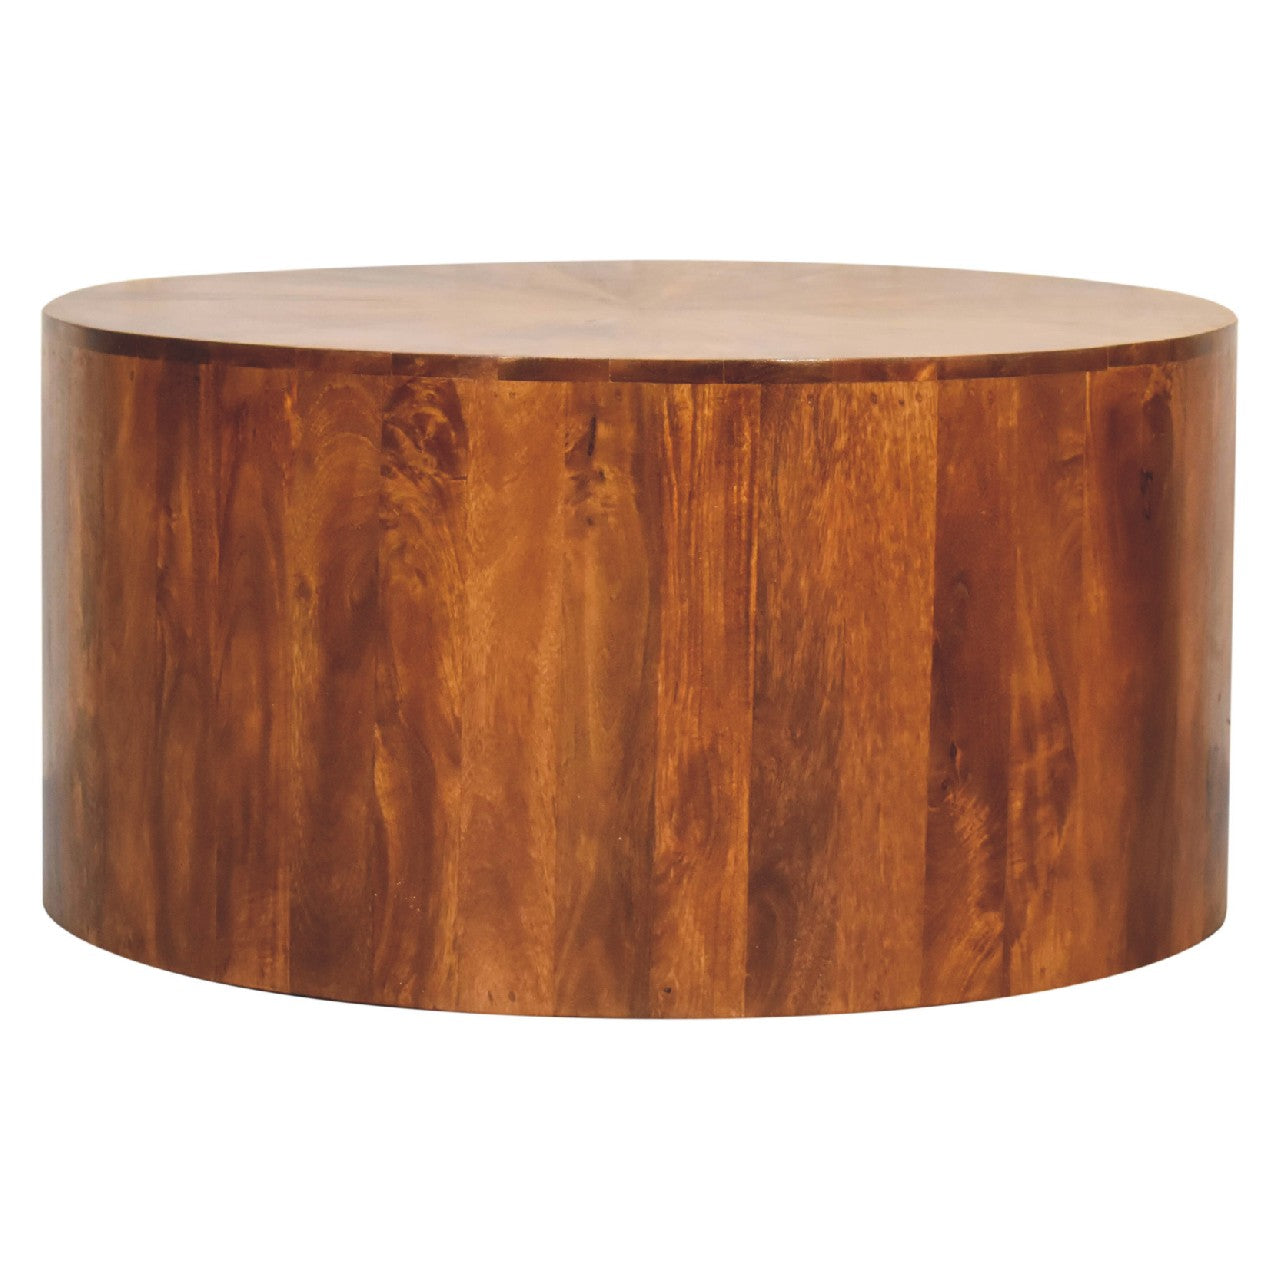 View Chestnut Round Wooden Coffee Table information